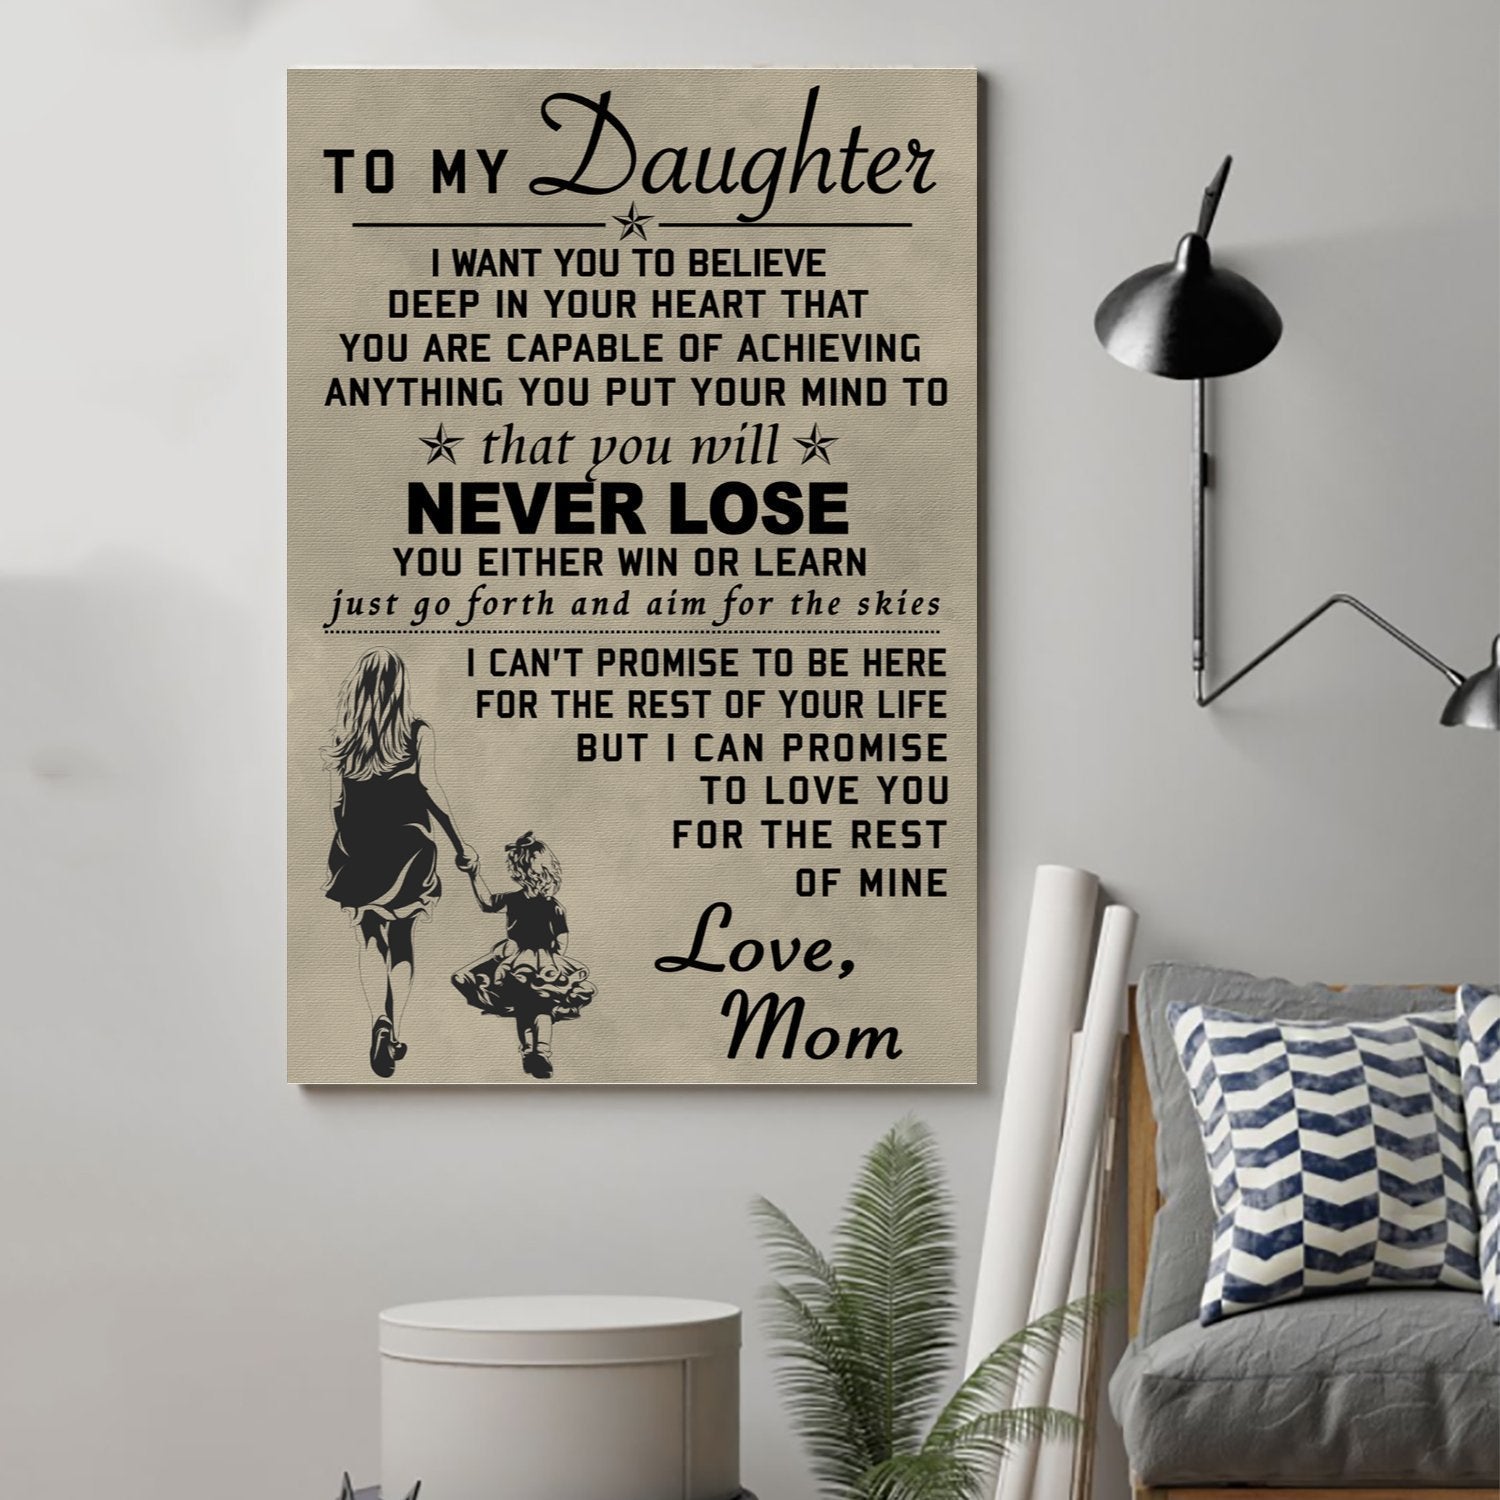 Family Canvas and Poster ��� Mom to daughter ��� Never lose wall decor visual art - GIFTCUSTOM